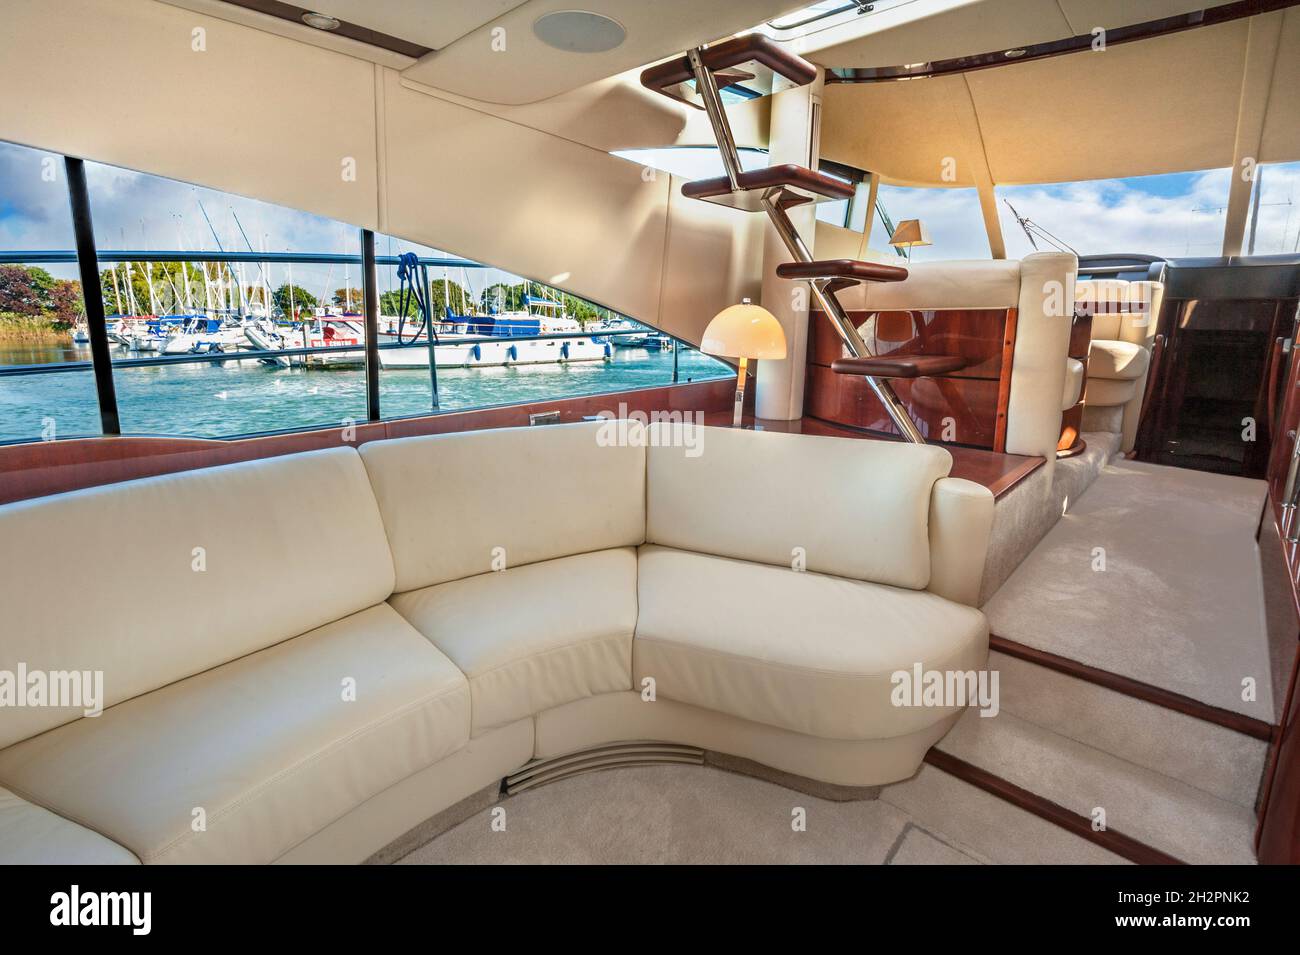 Princess 50 luxury motor yacht interior, with cream leather seating, leading to the carpeted front of the yacht with the captains steering and engine controls area and stairs to the flybridge Stock Photo